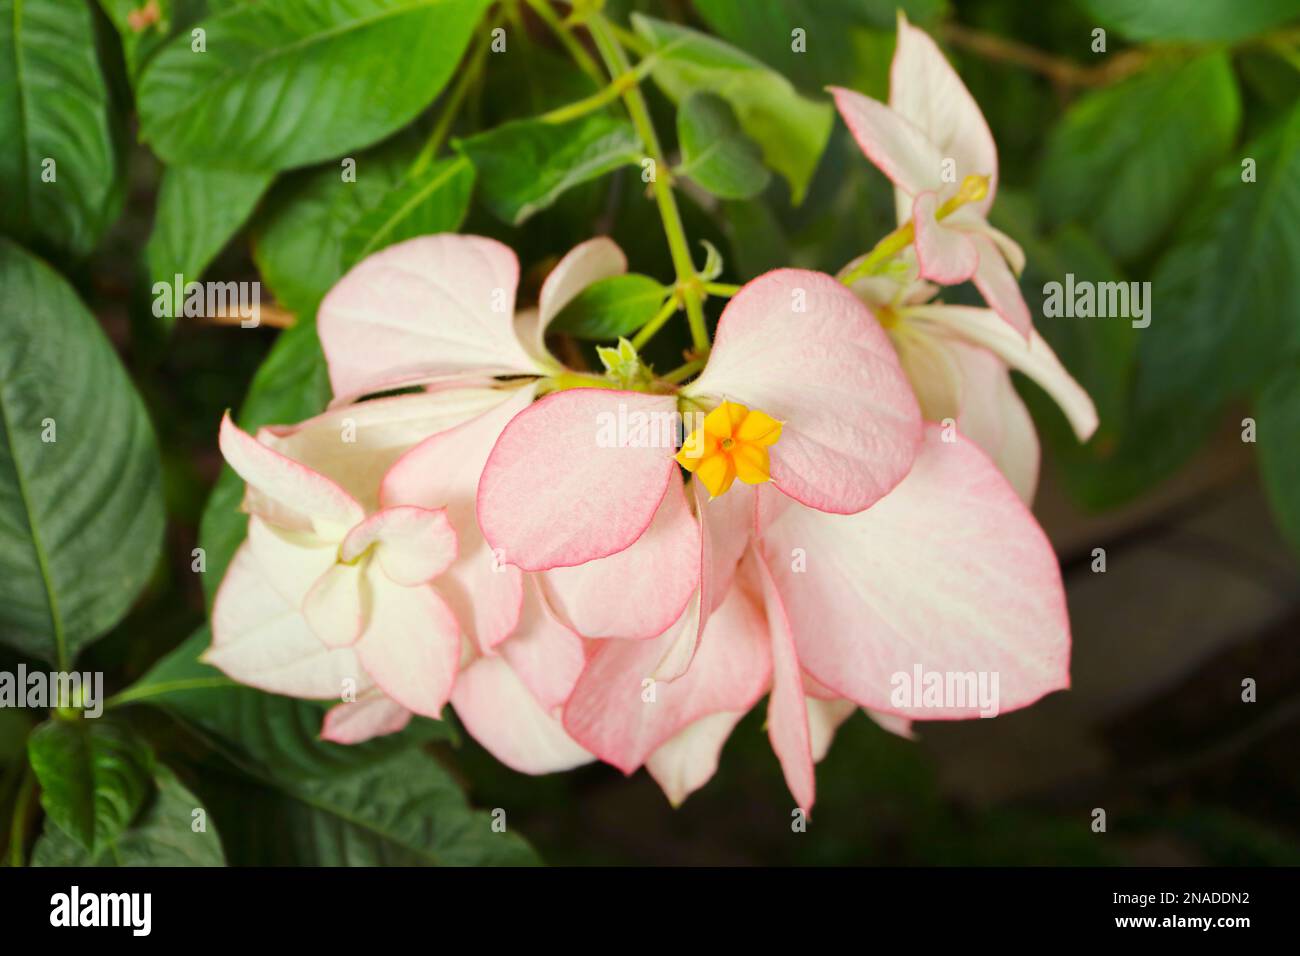 Mussaenda Philippica Queen Sirikit with Gorgeous Light Pink Sepal, the Flower's Named in Honor of Queen Sirikit of Thailand by the Philippine Governme Stock Photo